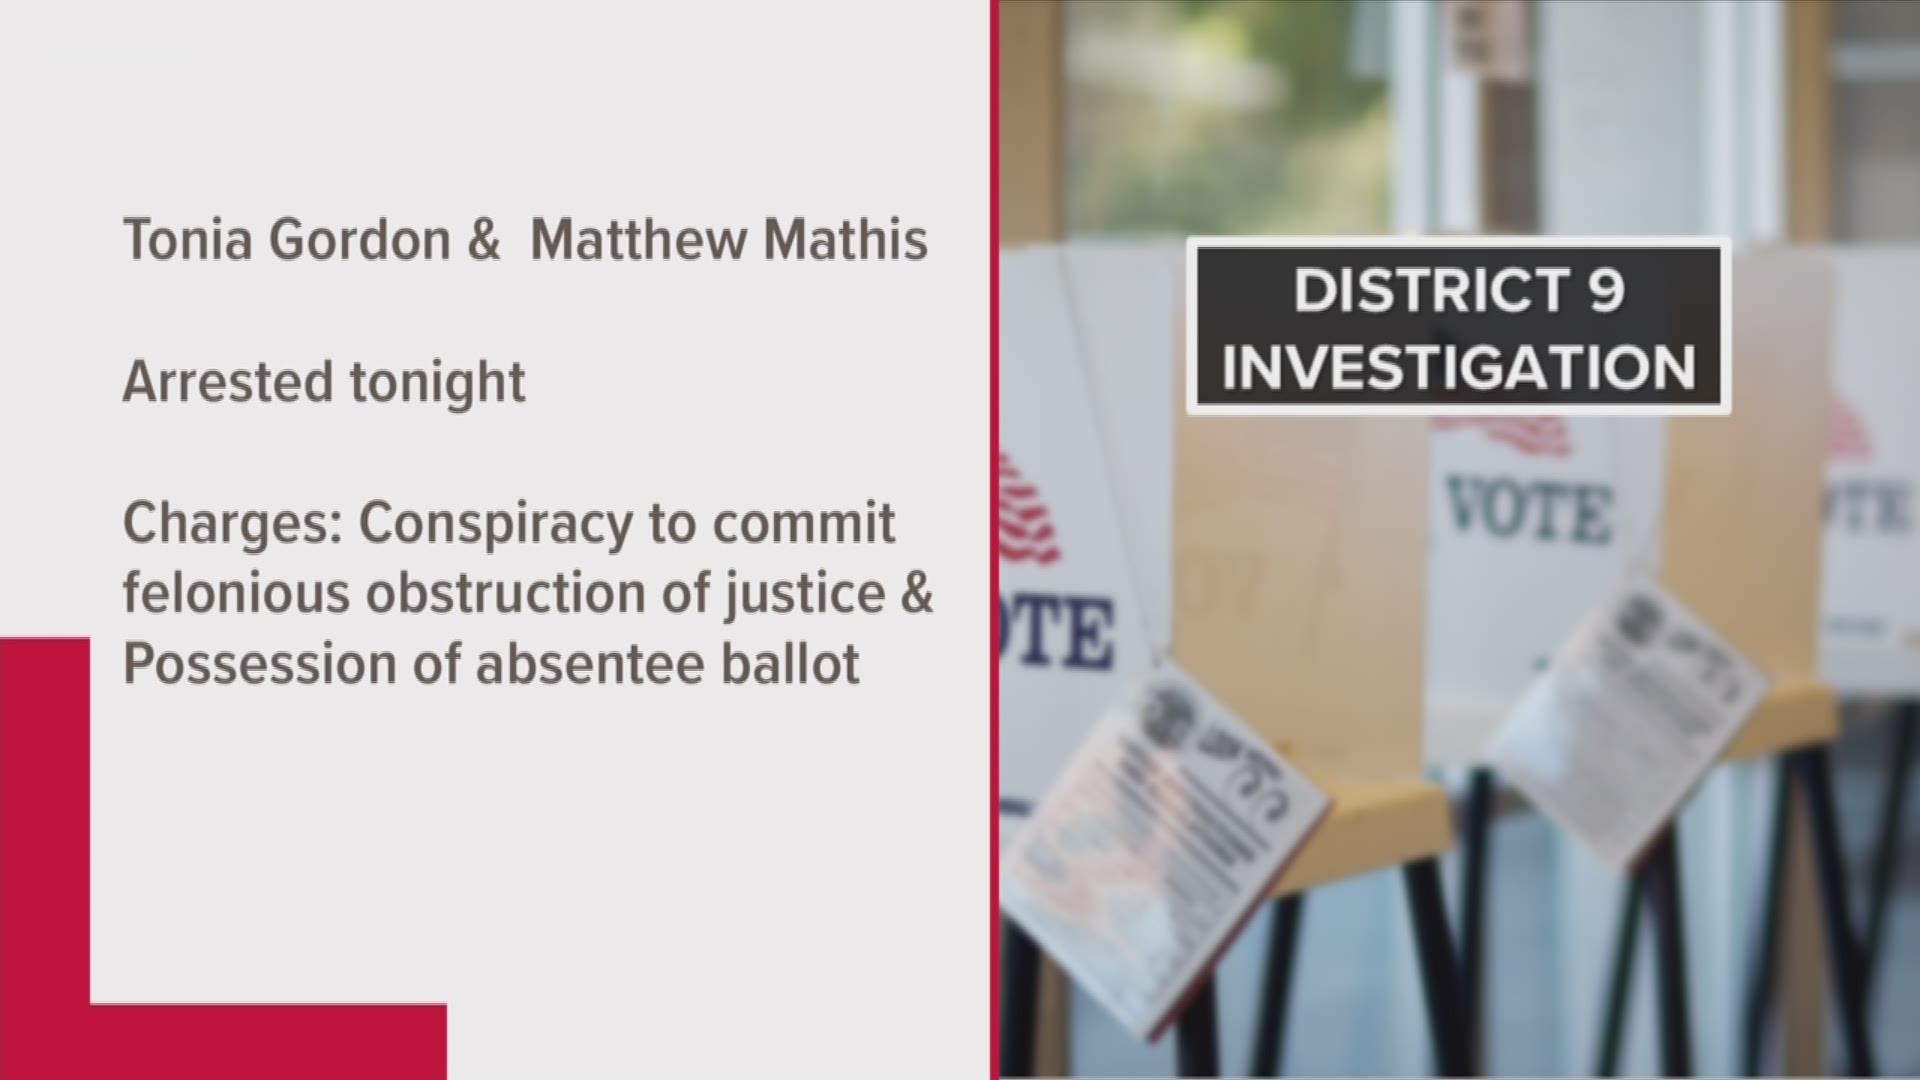 The charges stem from the 2016 election cycle and the 2018 primary. Allegations of illegal activity during last fall's election remain under investigation.